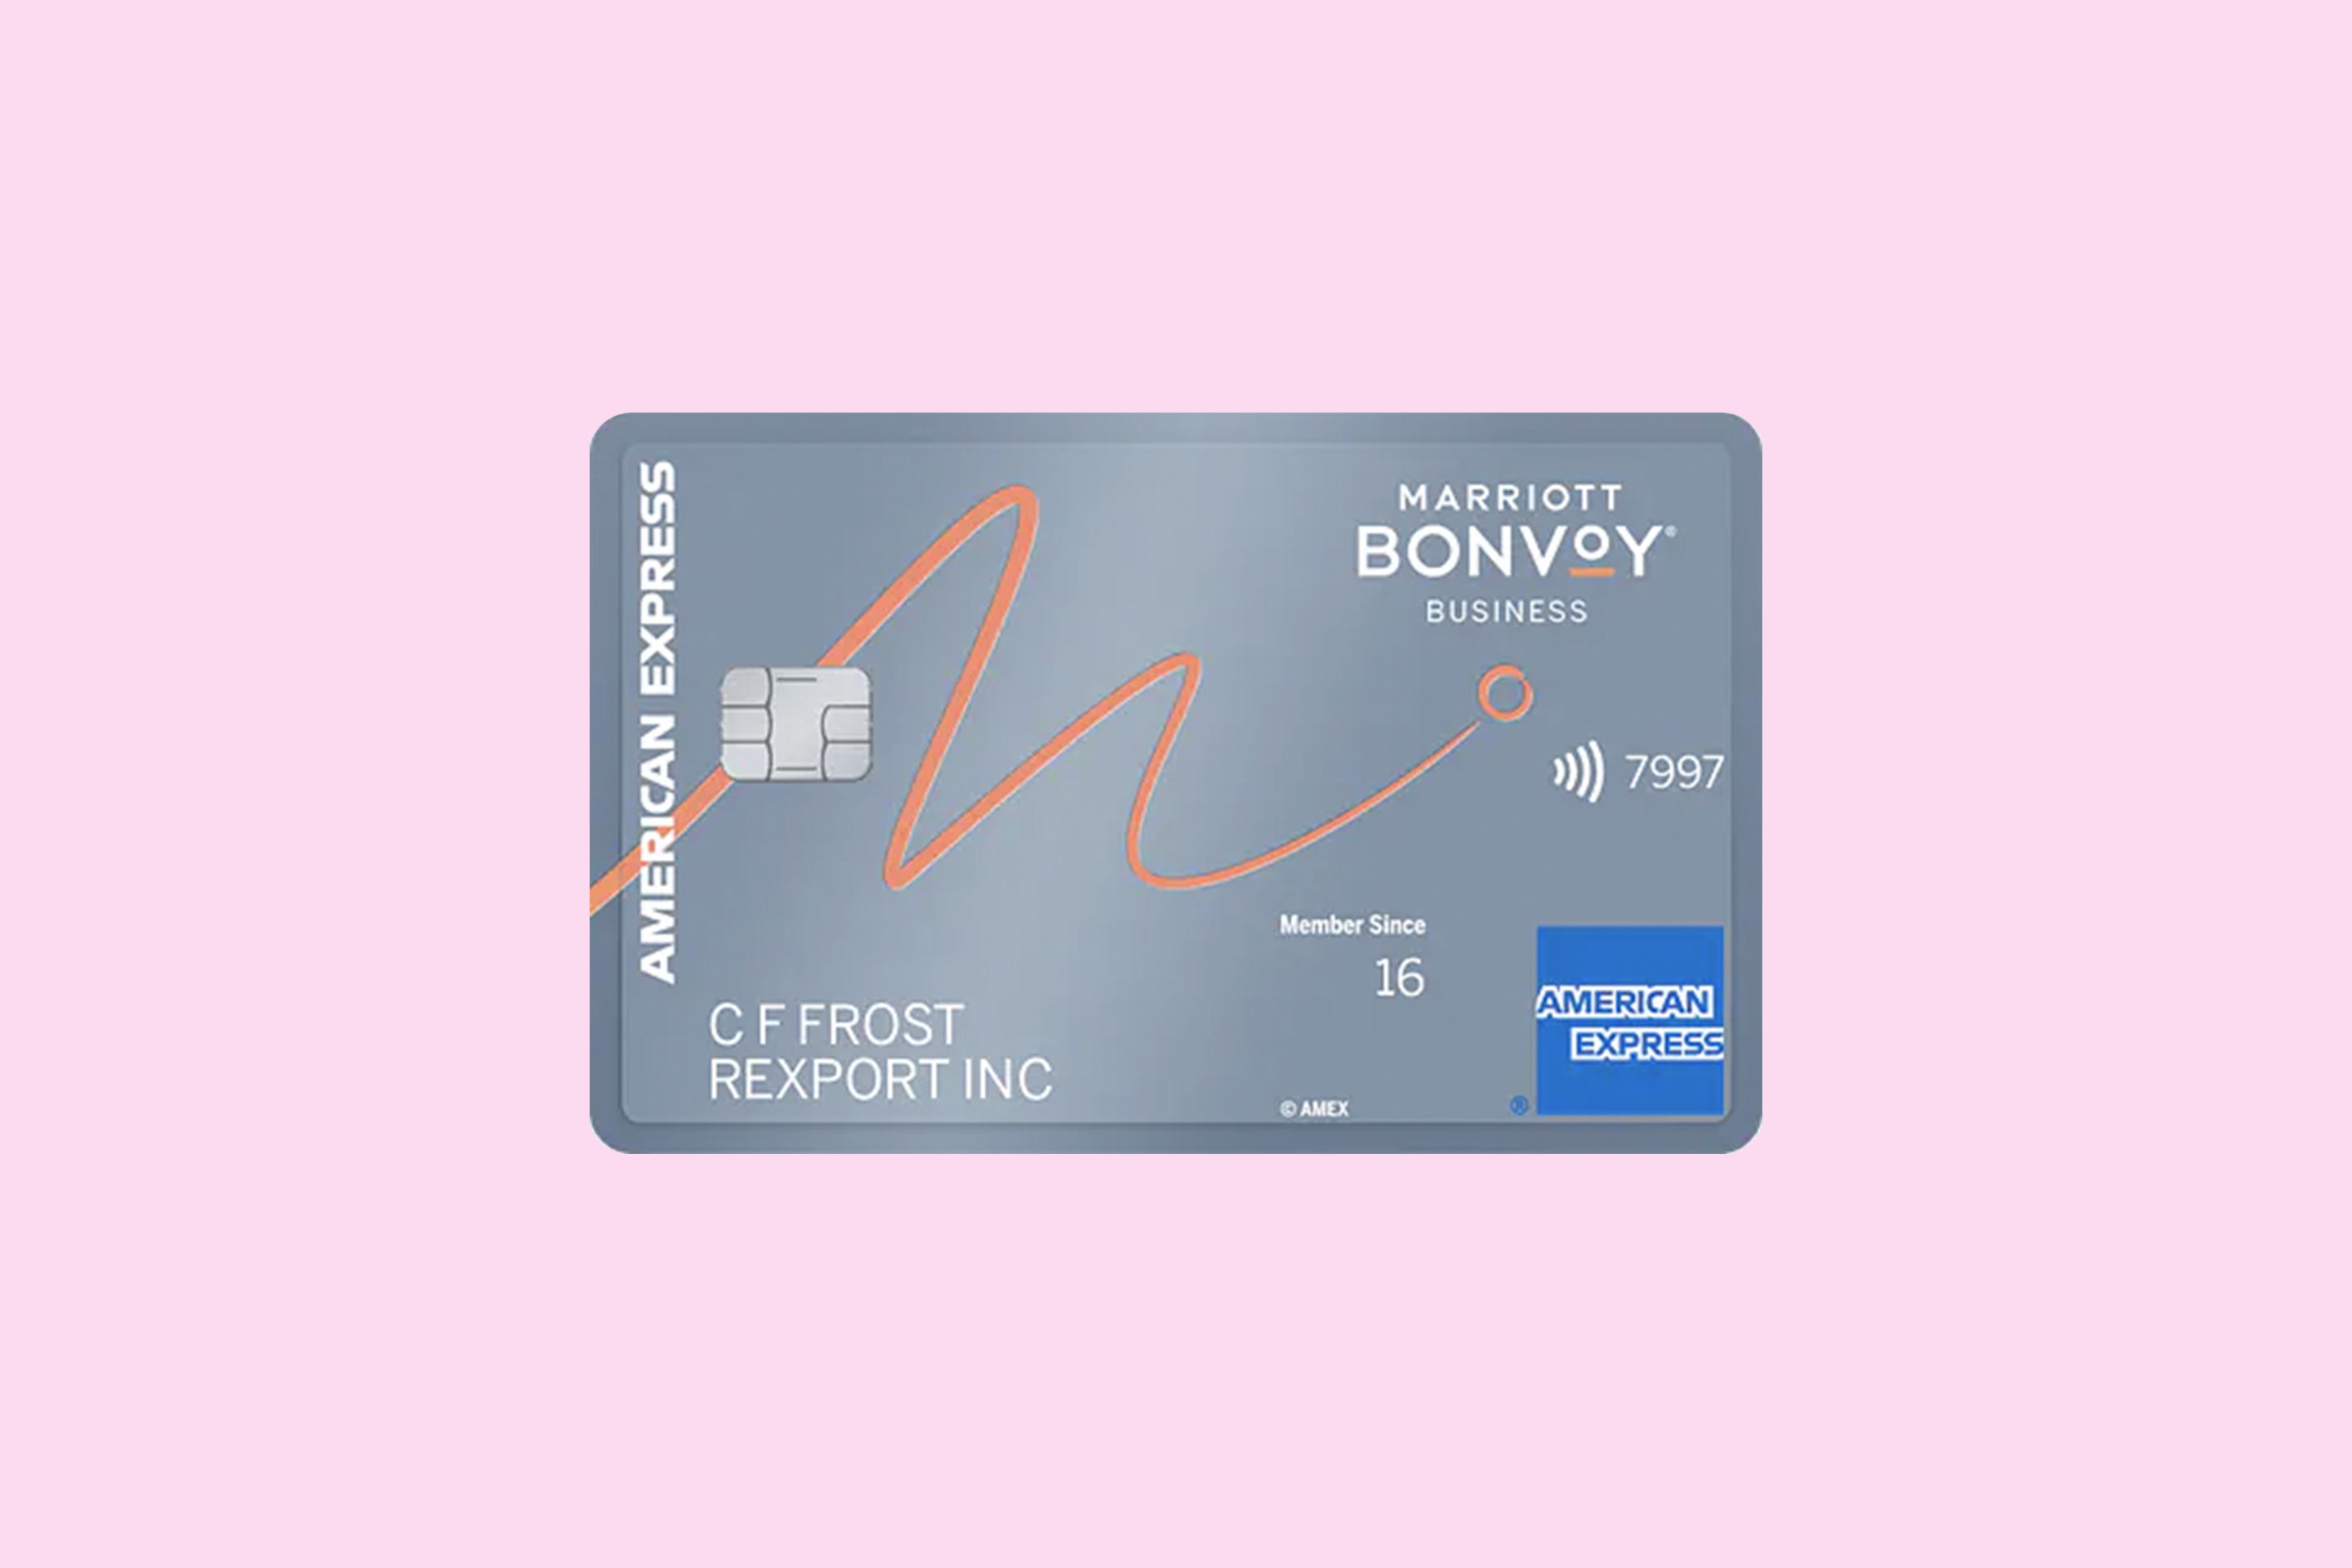 Marriott Bonvoy Business Credit Card by American Express